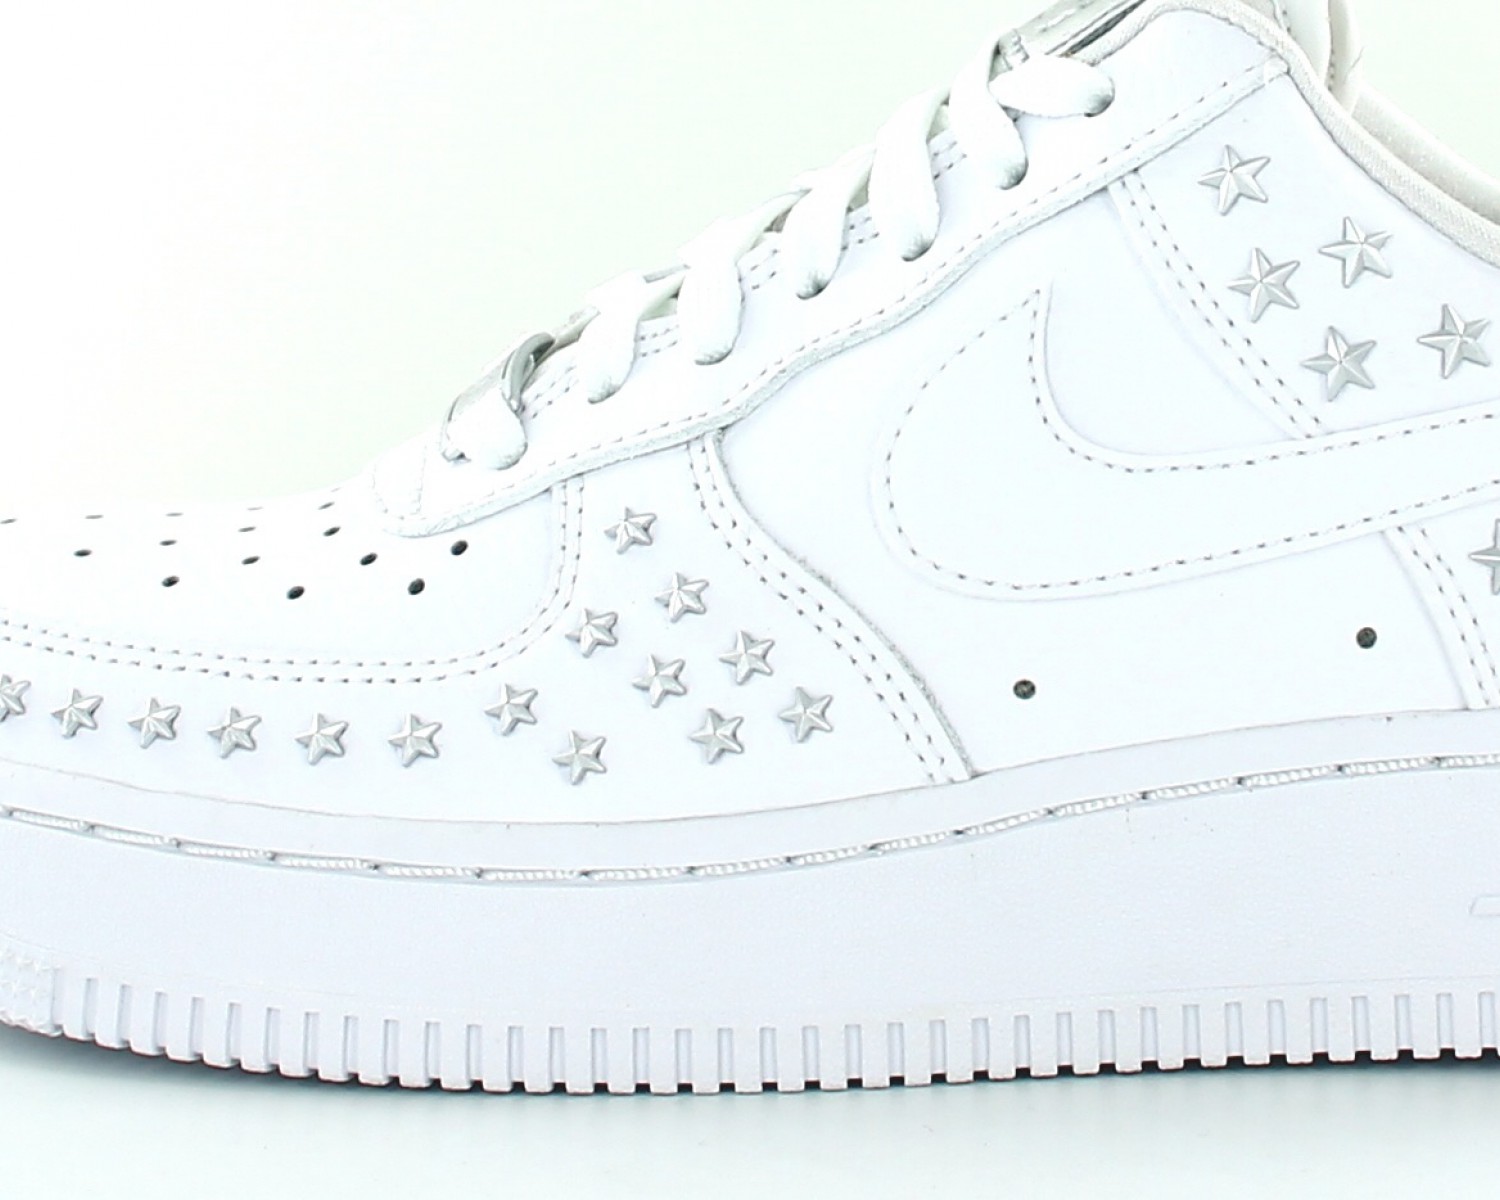 nike air force argent